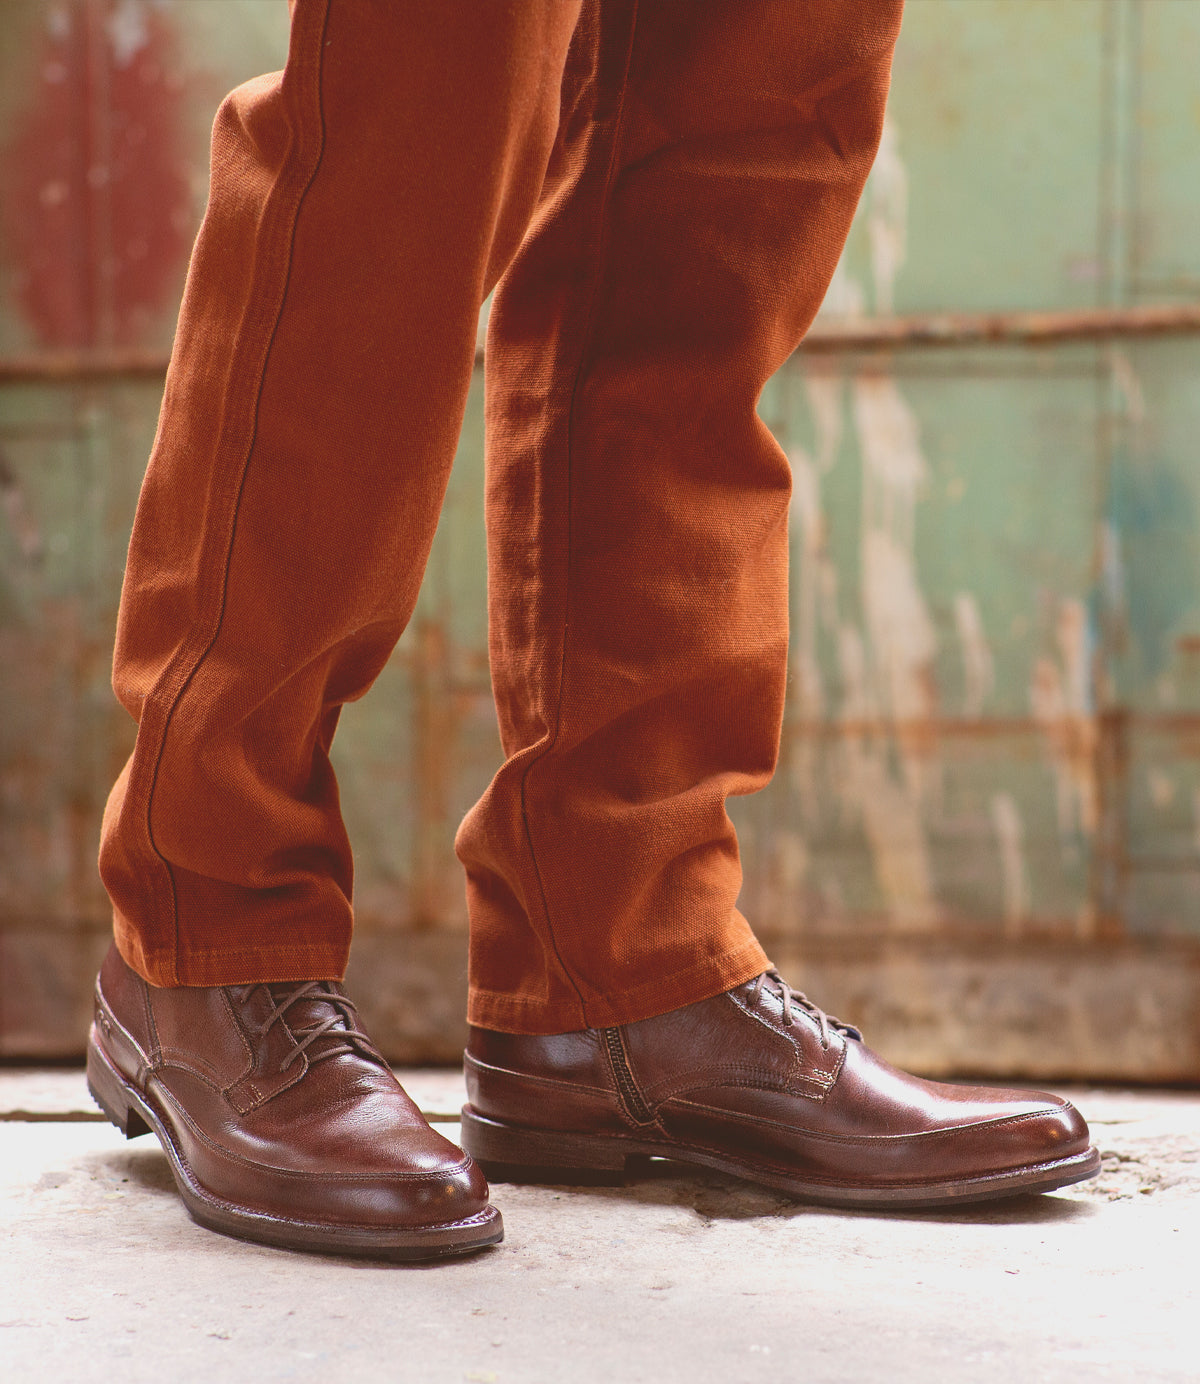 A person standing in Bed Stu Spiker Teak Rustic Boots and rust-colored trousers against a faded, multicolored metal background.